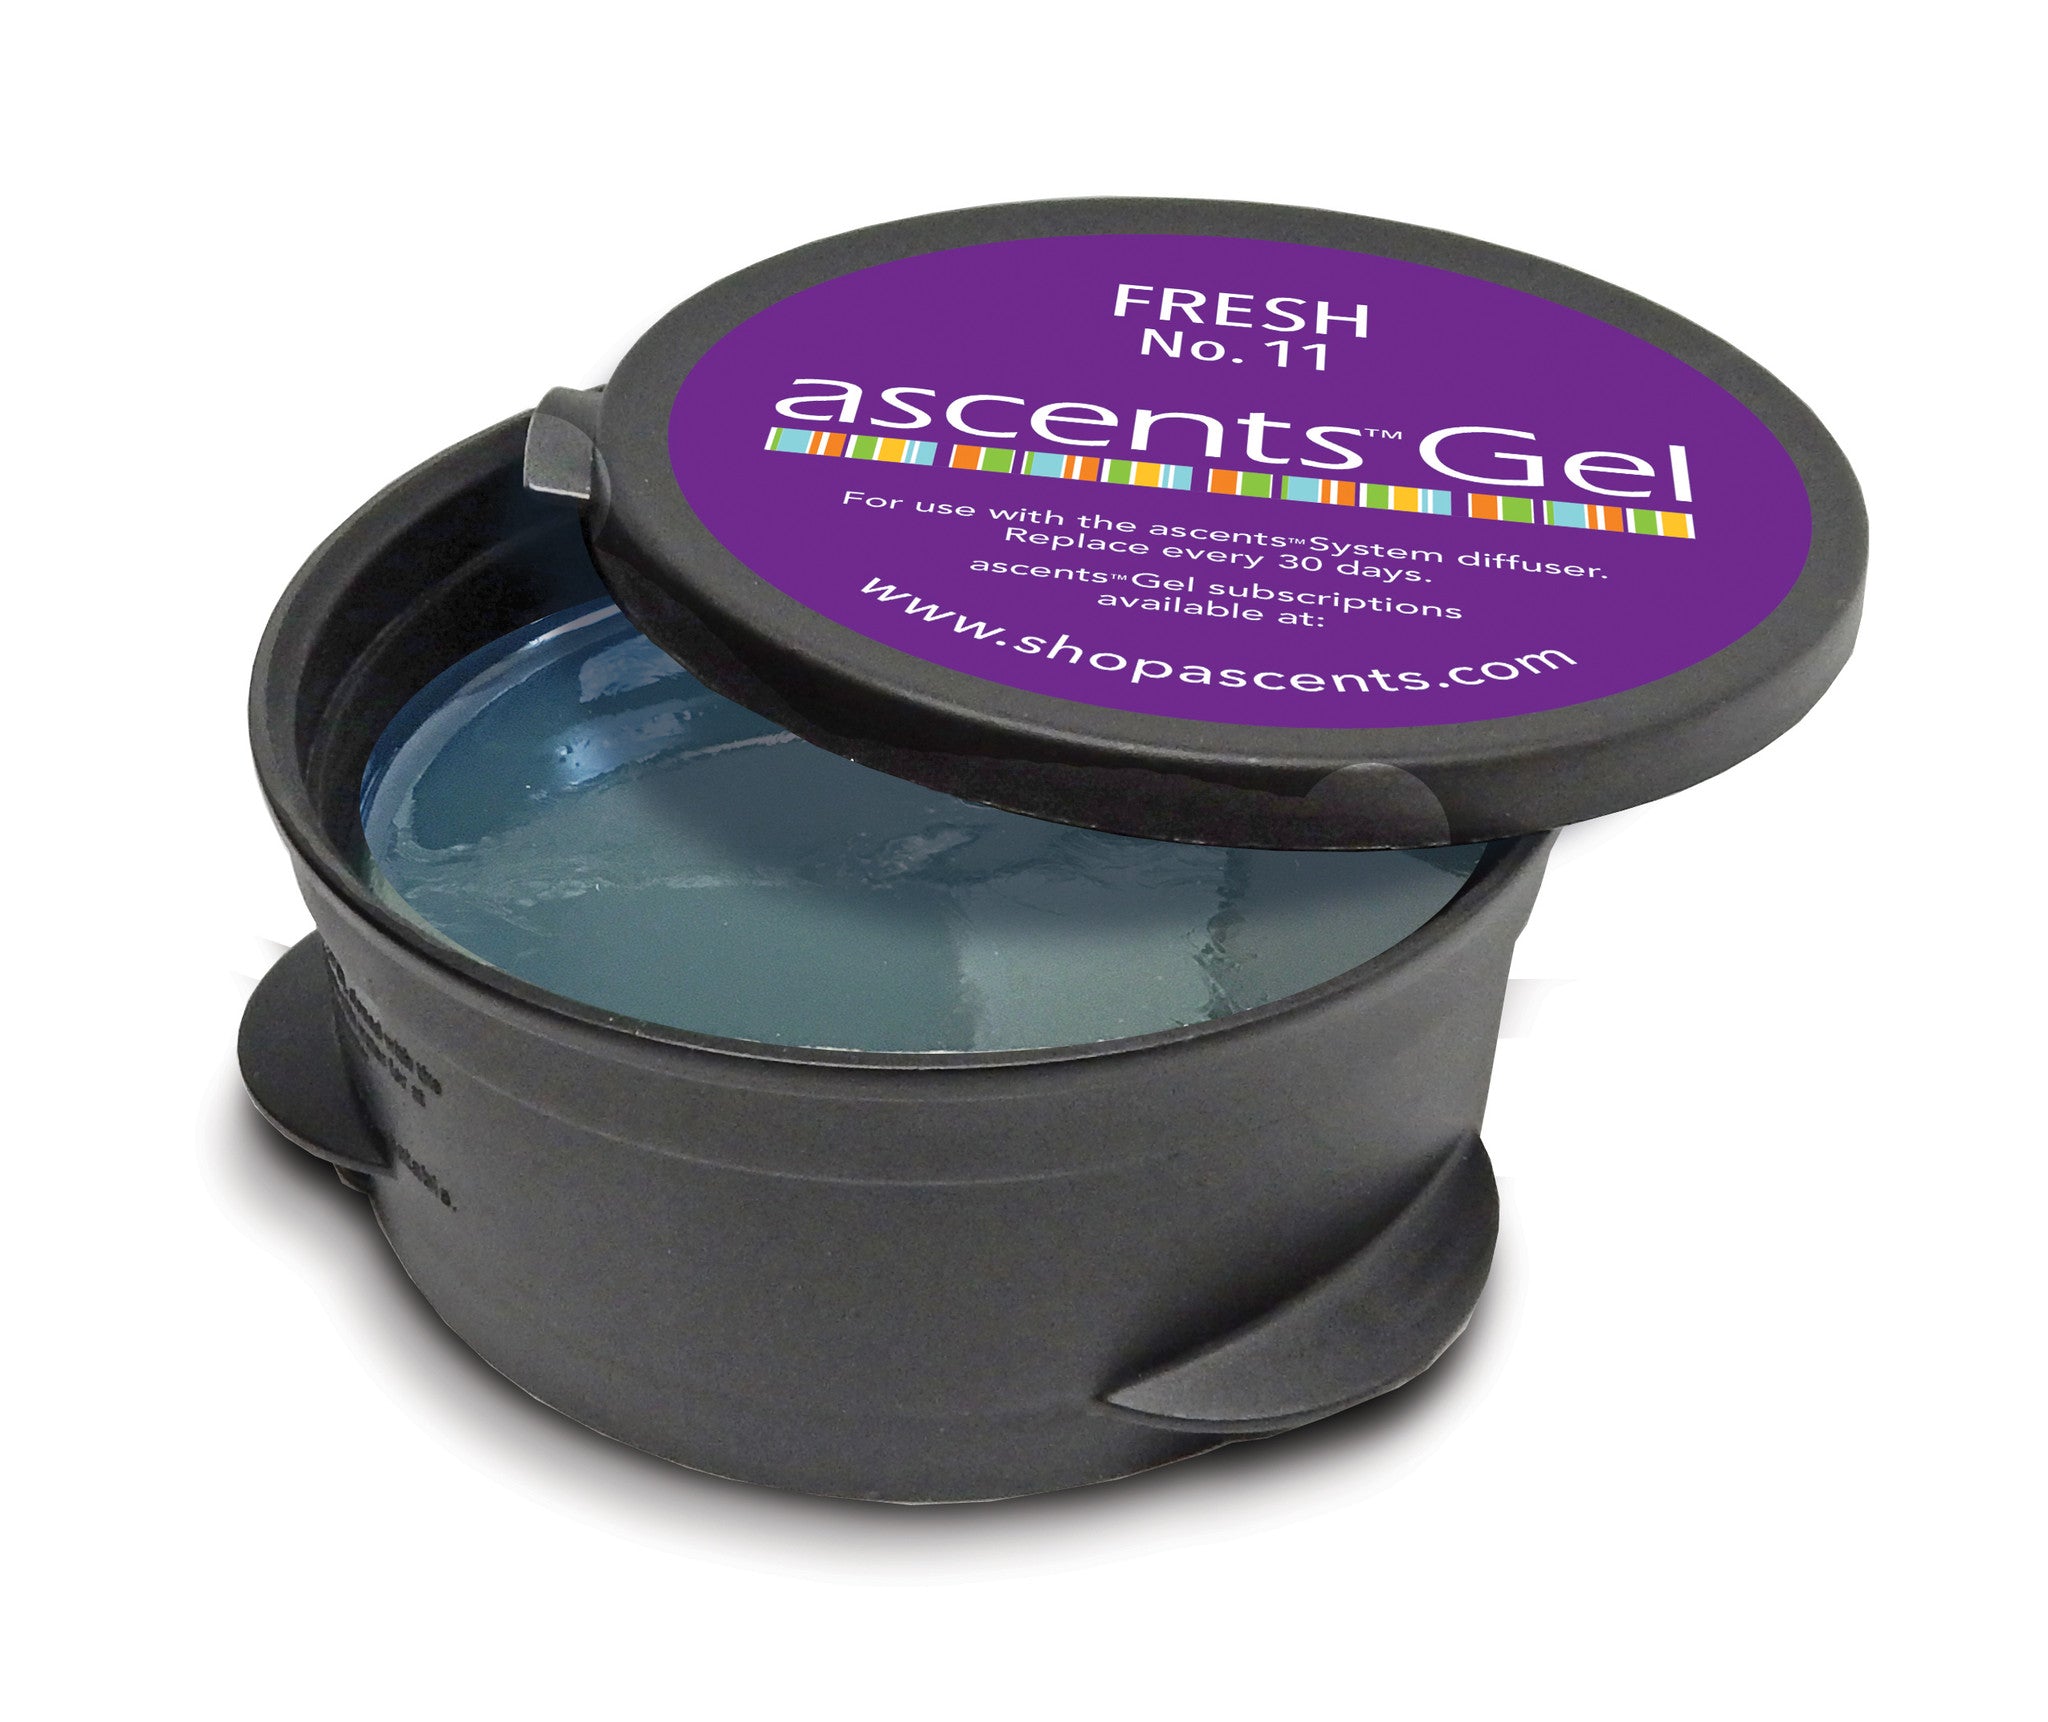 Essential Oil GEL - FRESH No. 11 - Clinical Aromatherapy for Uplifting & Balance